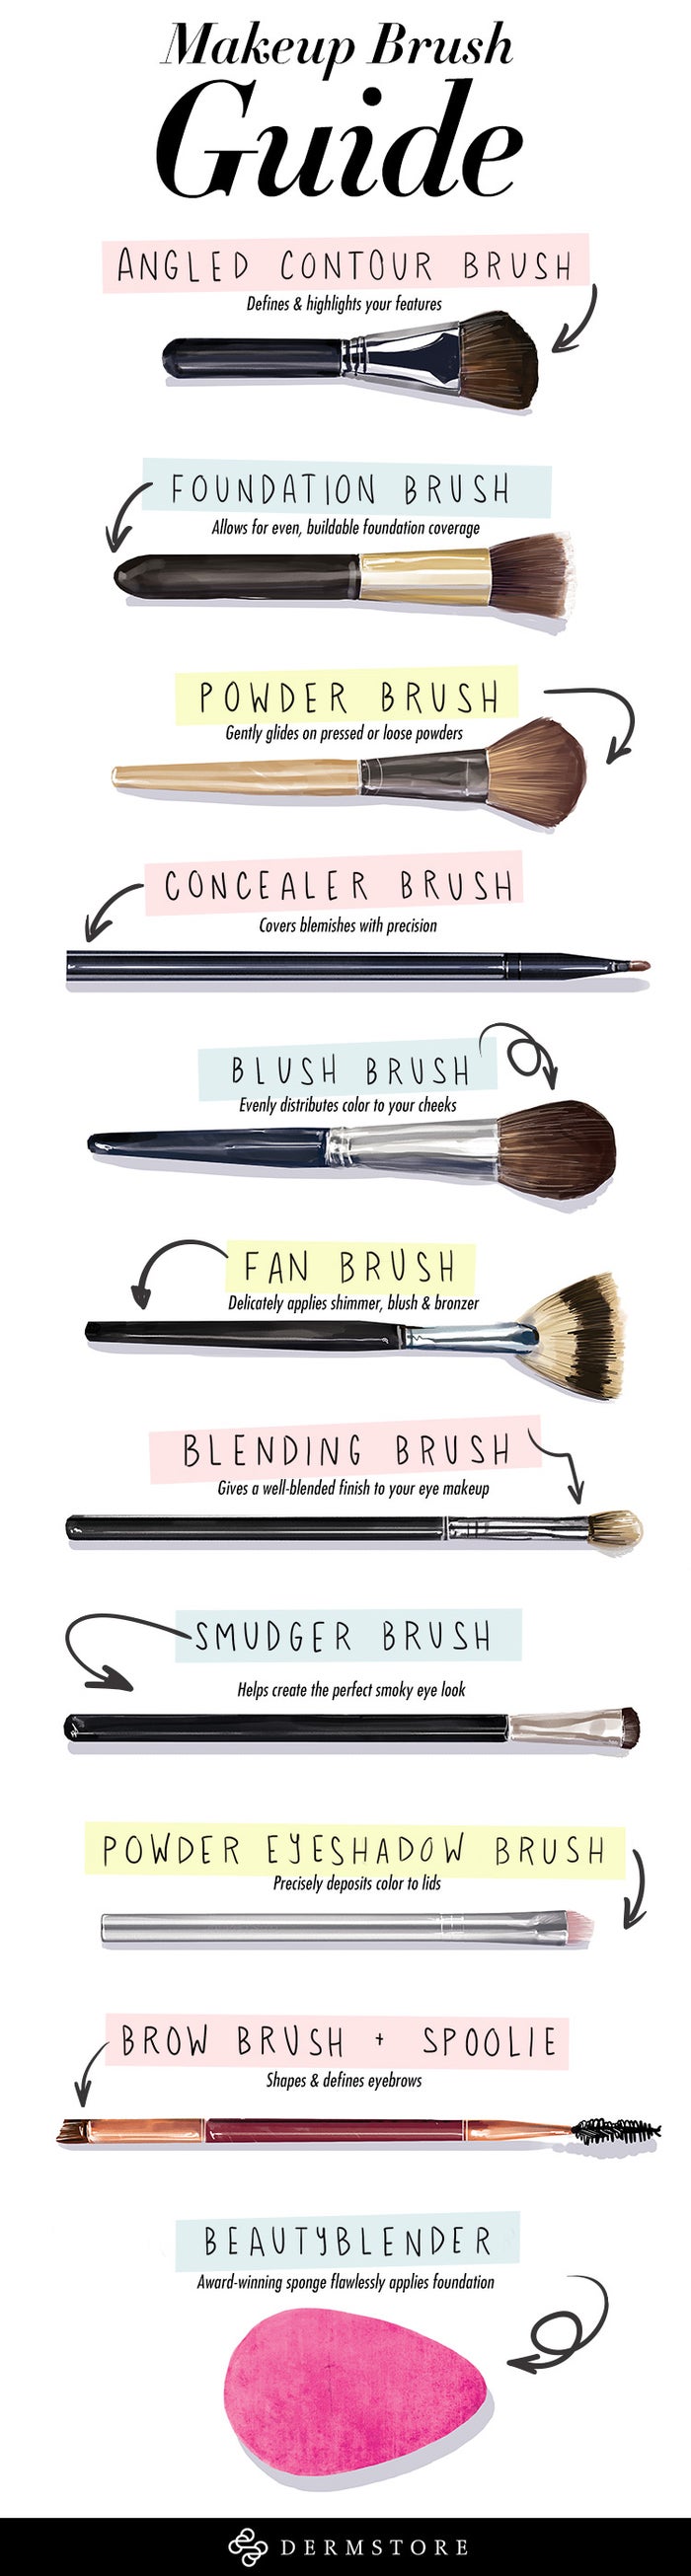 makeup brush guide infographic